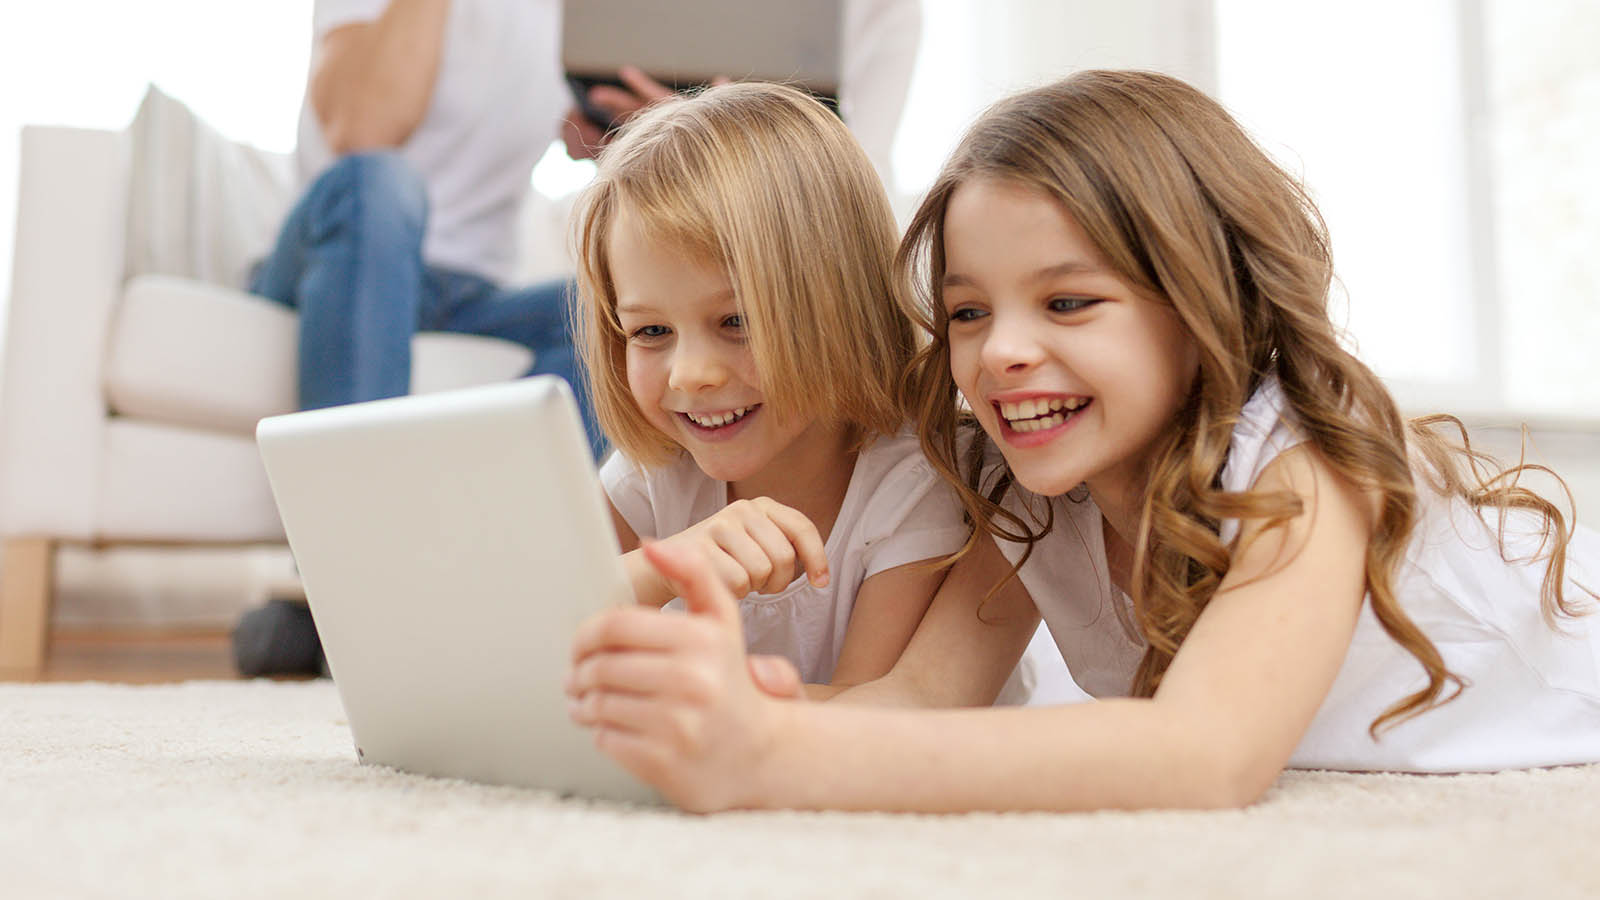 GNUS stock: An image of two young girls looking at a tablet and smiling while an adult reads in the background.